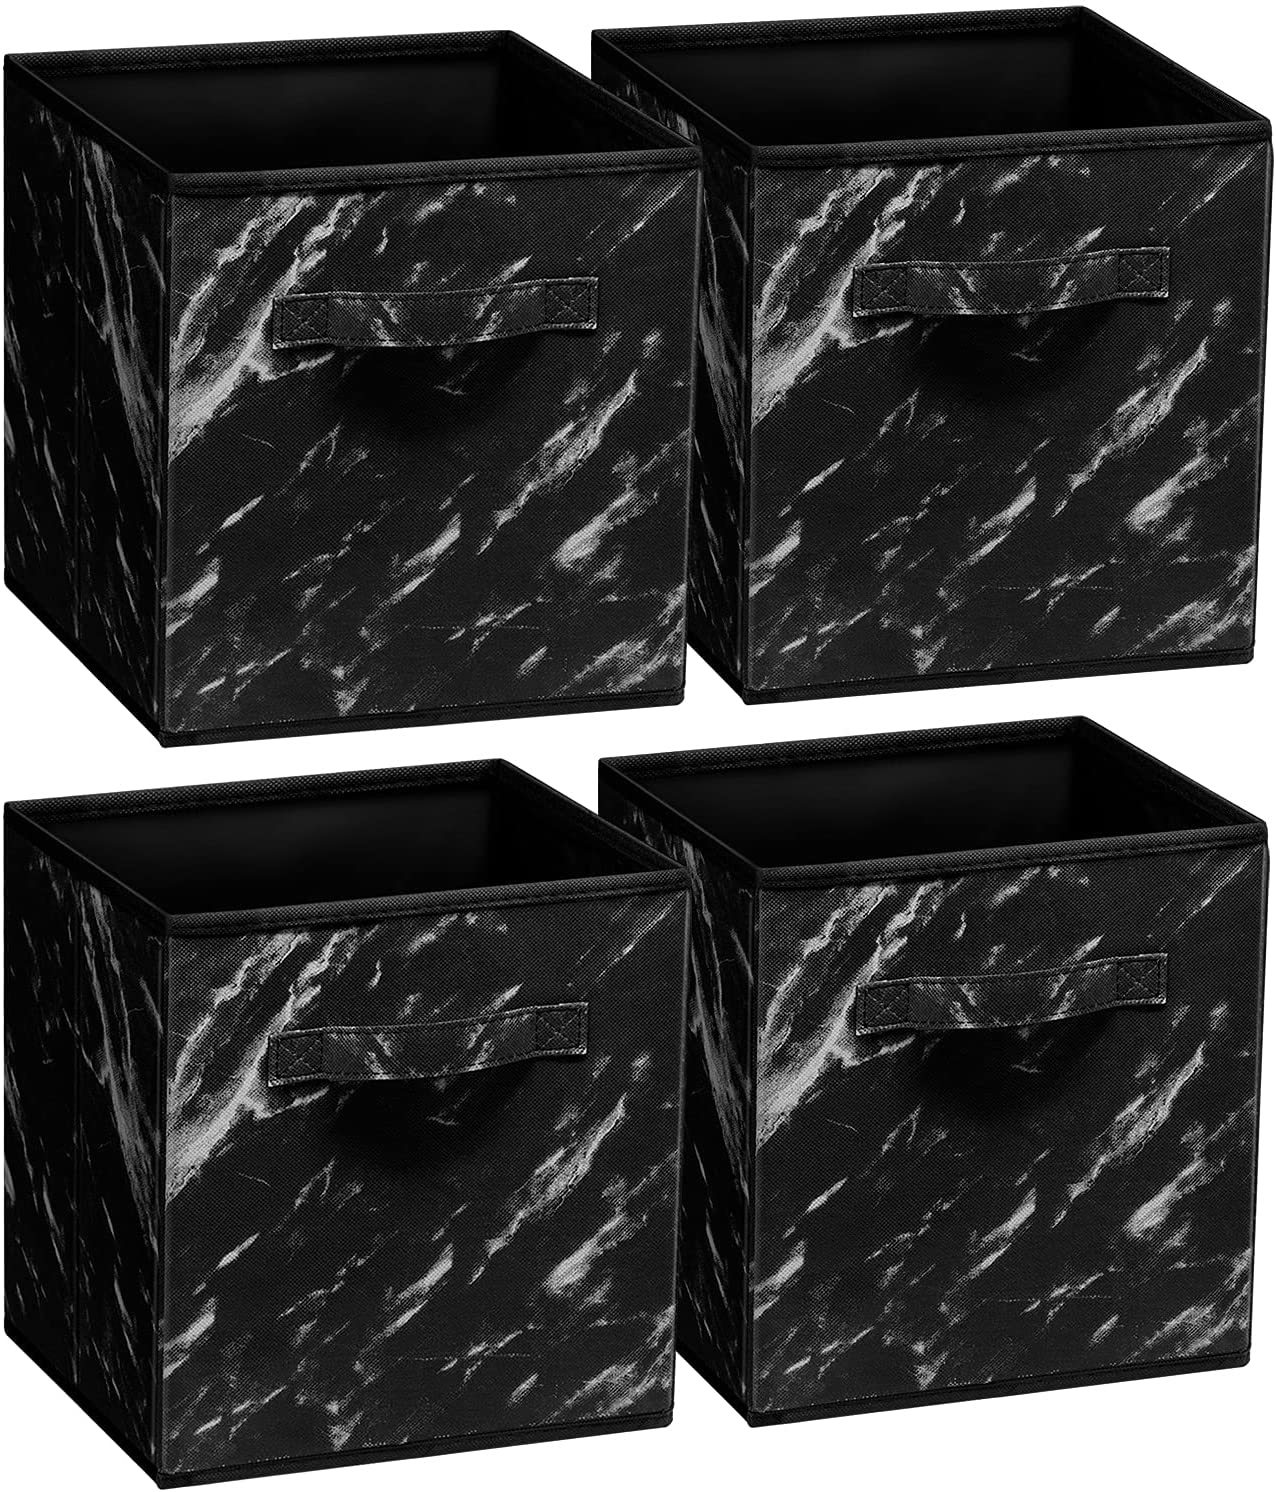 Sorbus 13.18 in. H x 3.54 in. W x 6.1 in. D Black Foldable Fabric Drawer  Dividers Cube Storage Bin (4-Pack) DOK4-BLK - The Home Depot